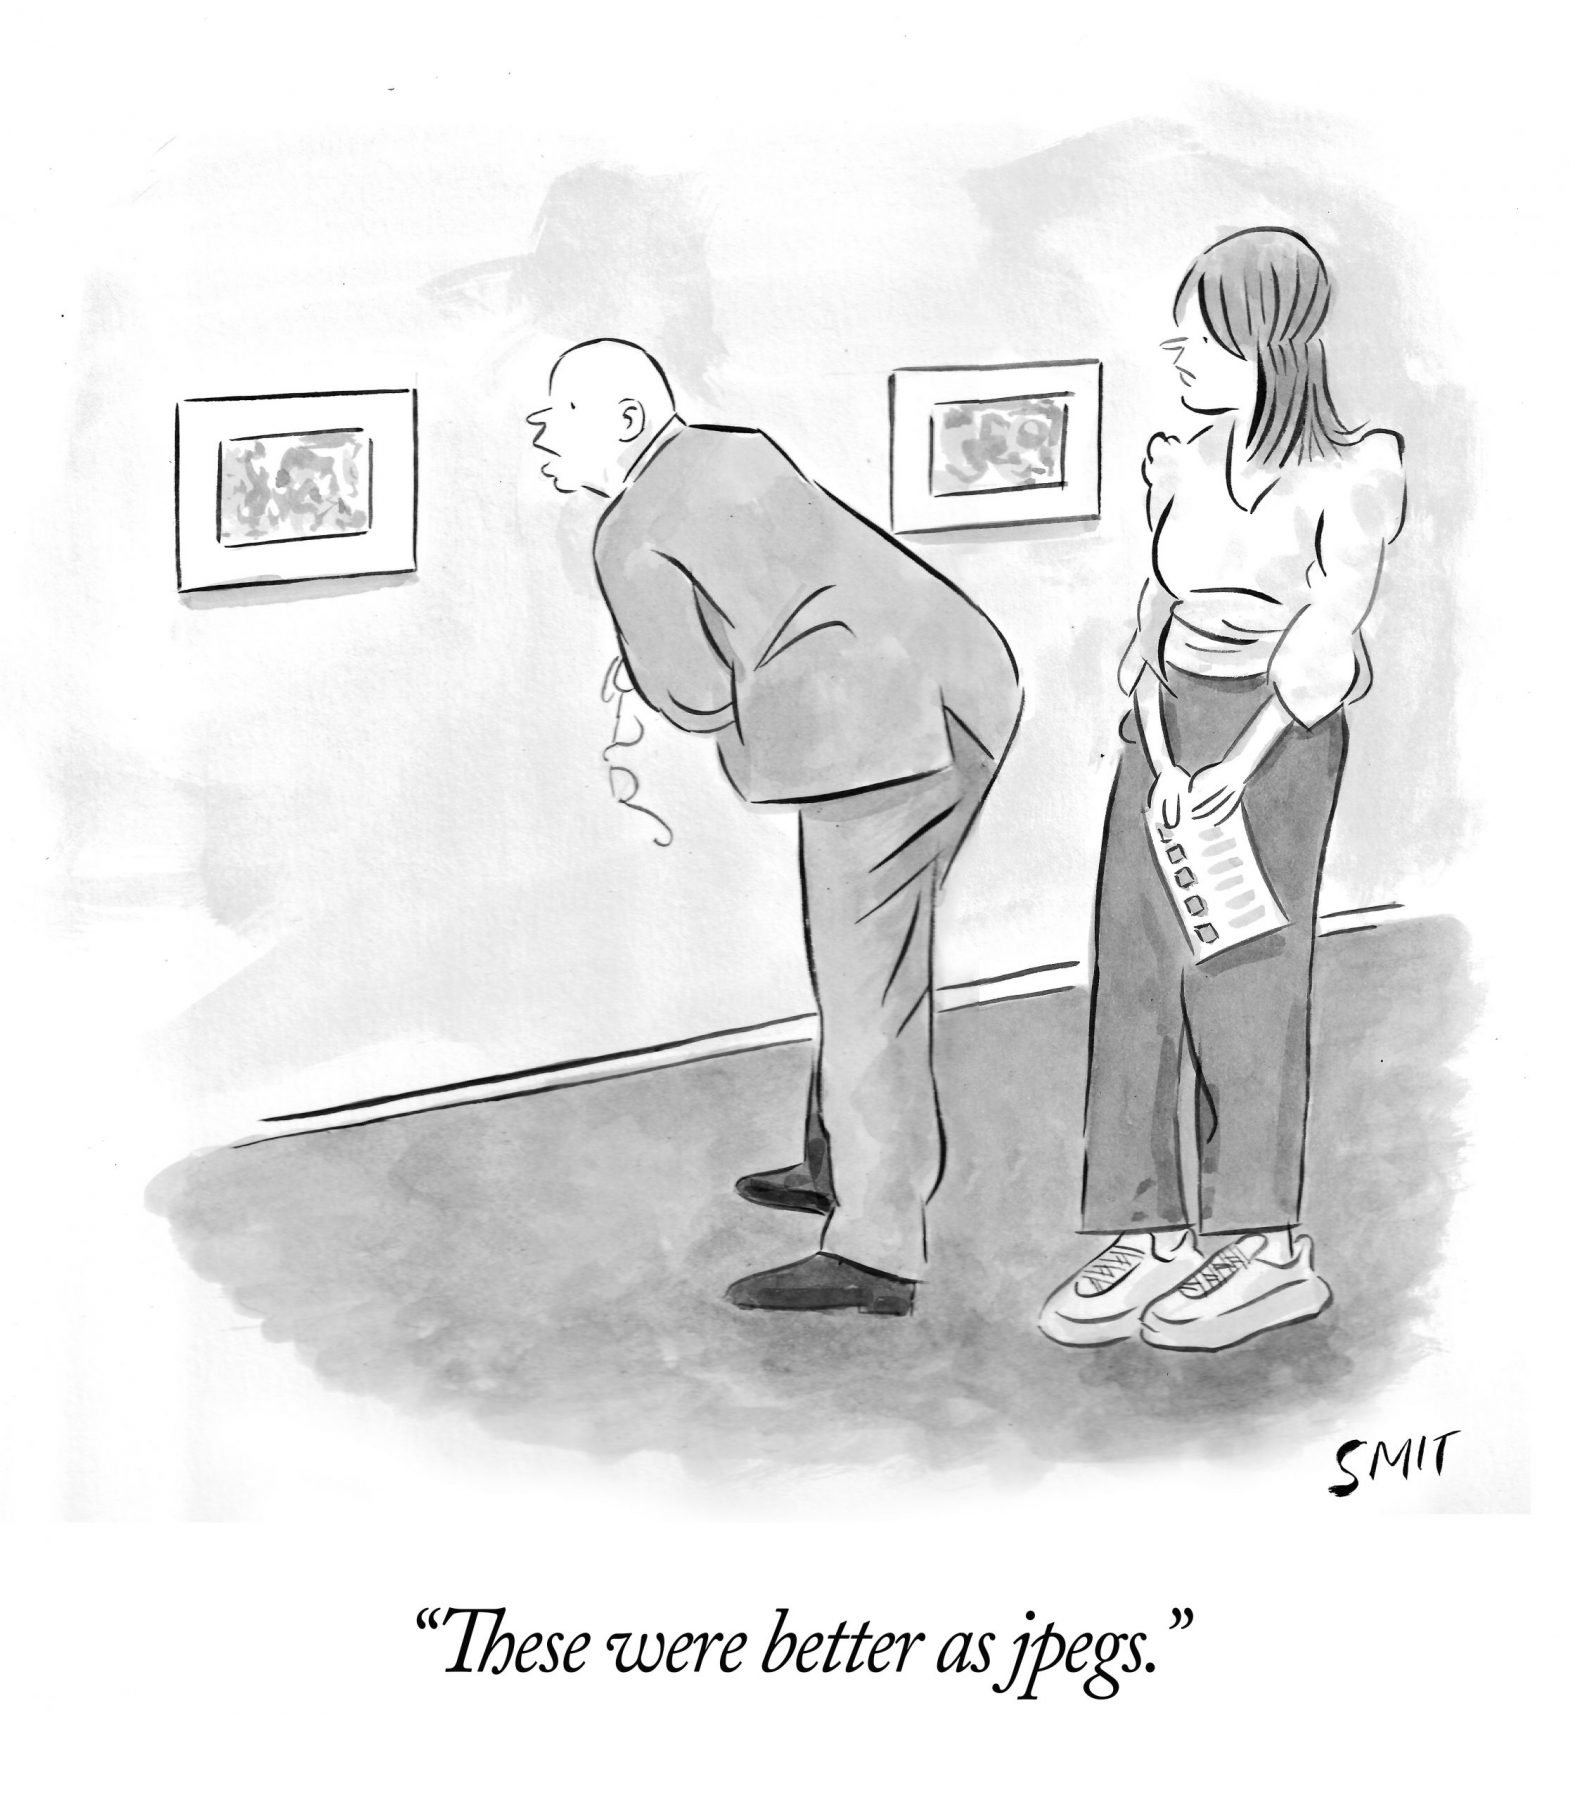 What Is the Biggest Risk in Art Collecting Today? [Cartoon]